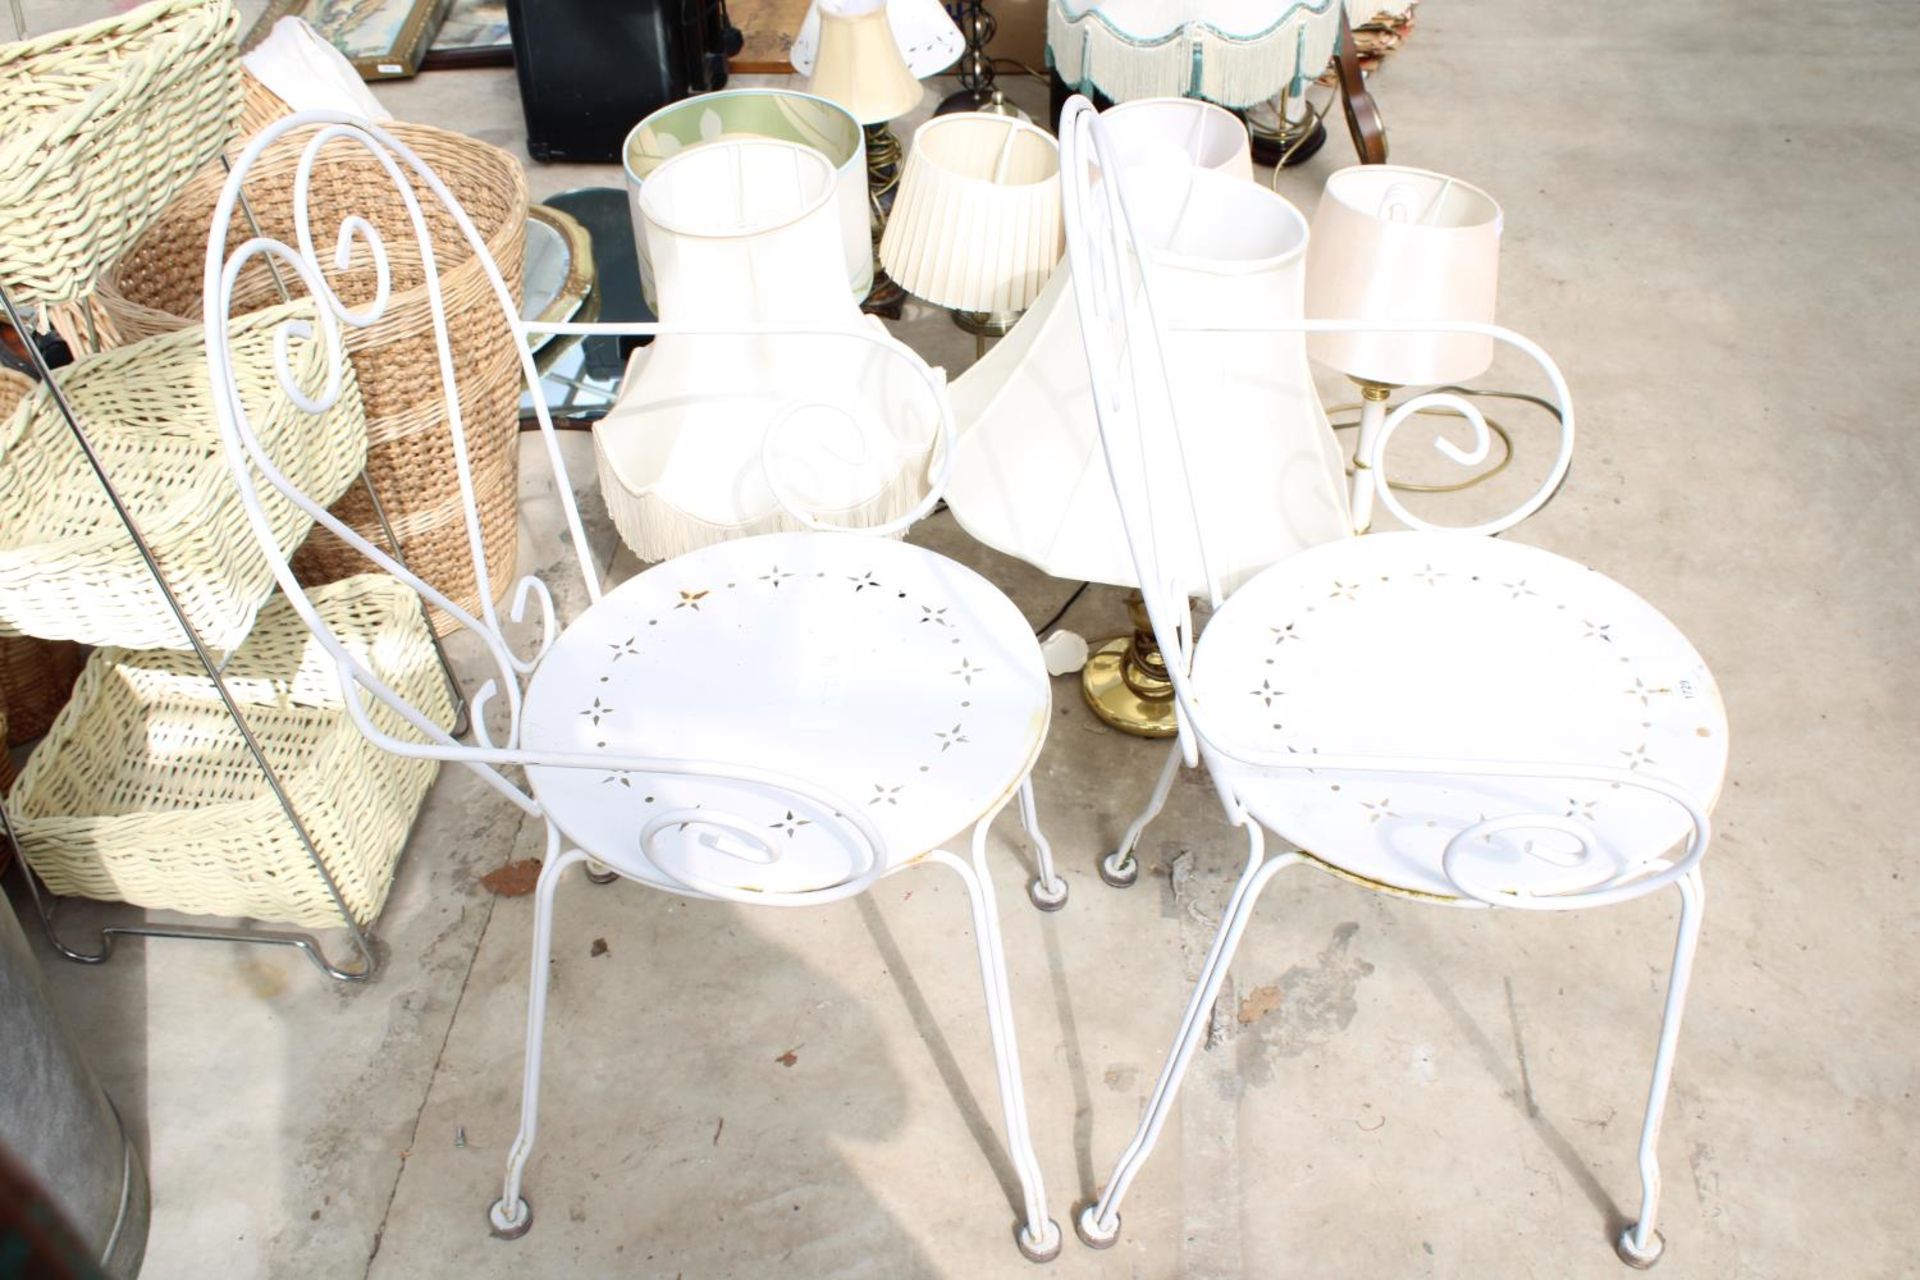 A PAIR OF DECORATIVE METAL BISTRO CHAIRS - Image 2 of 2